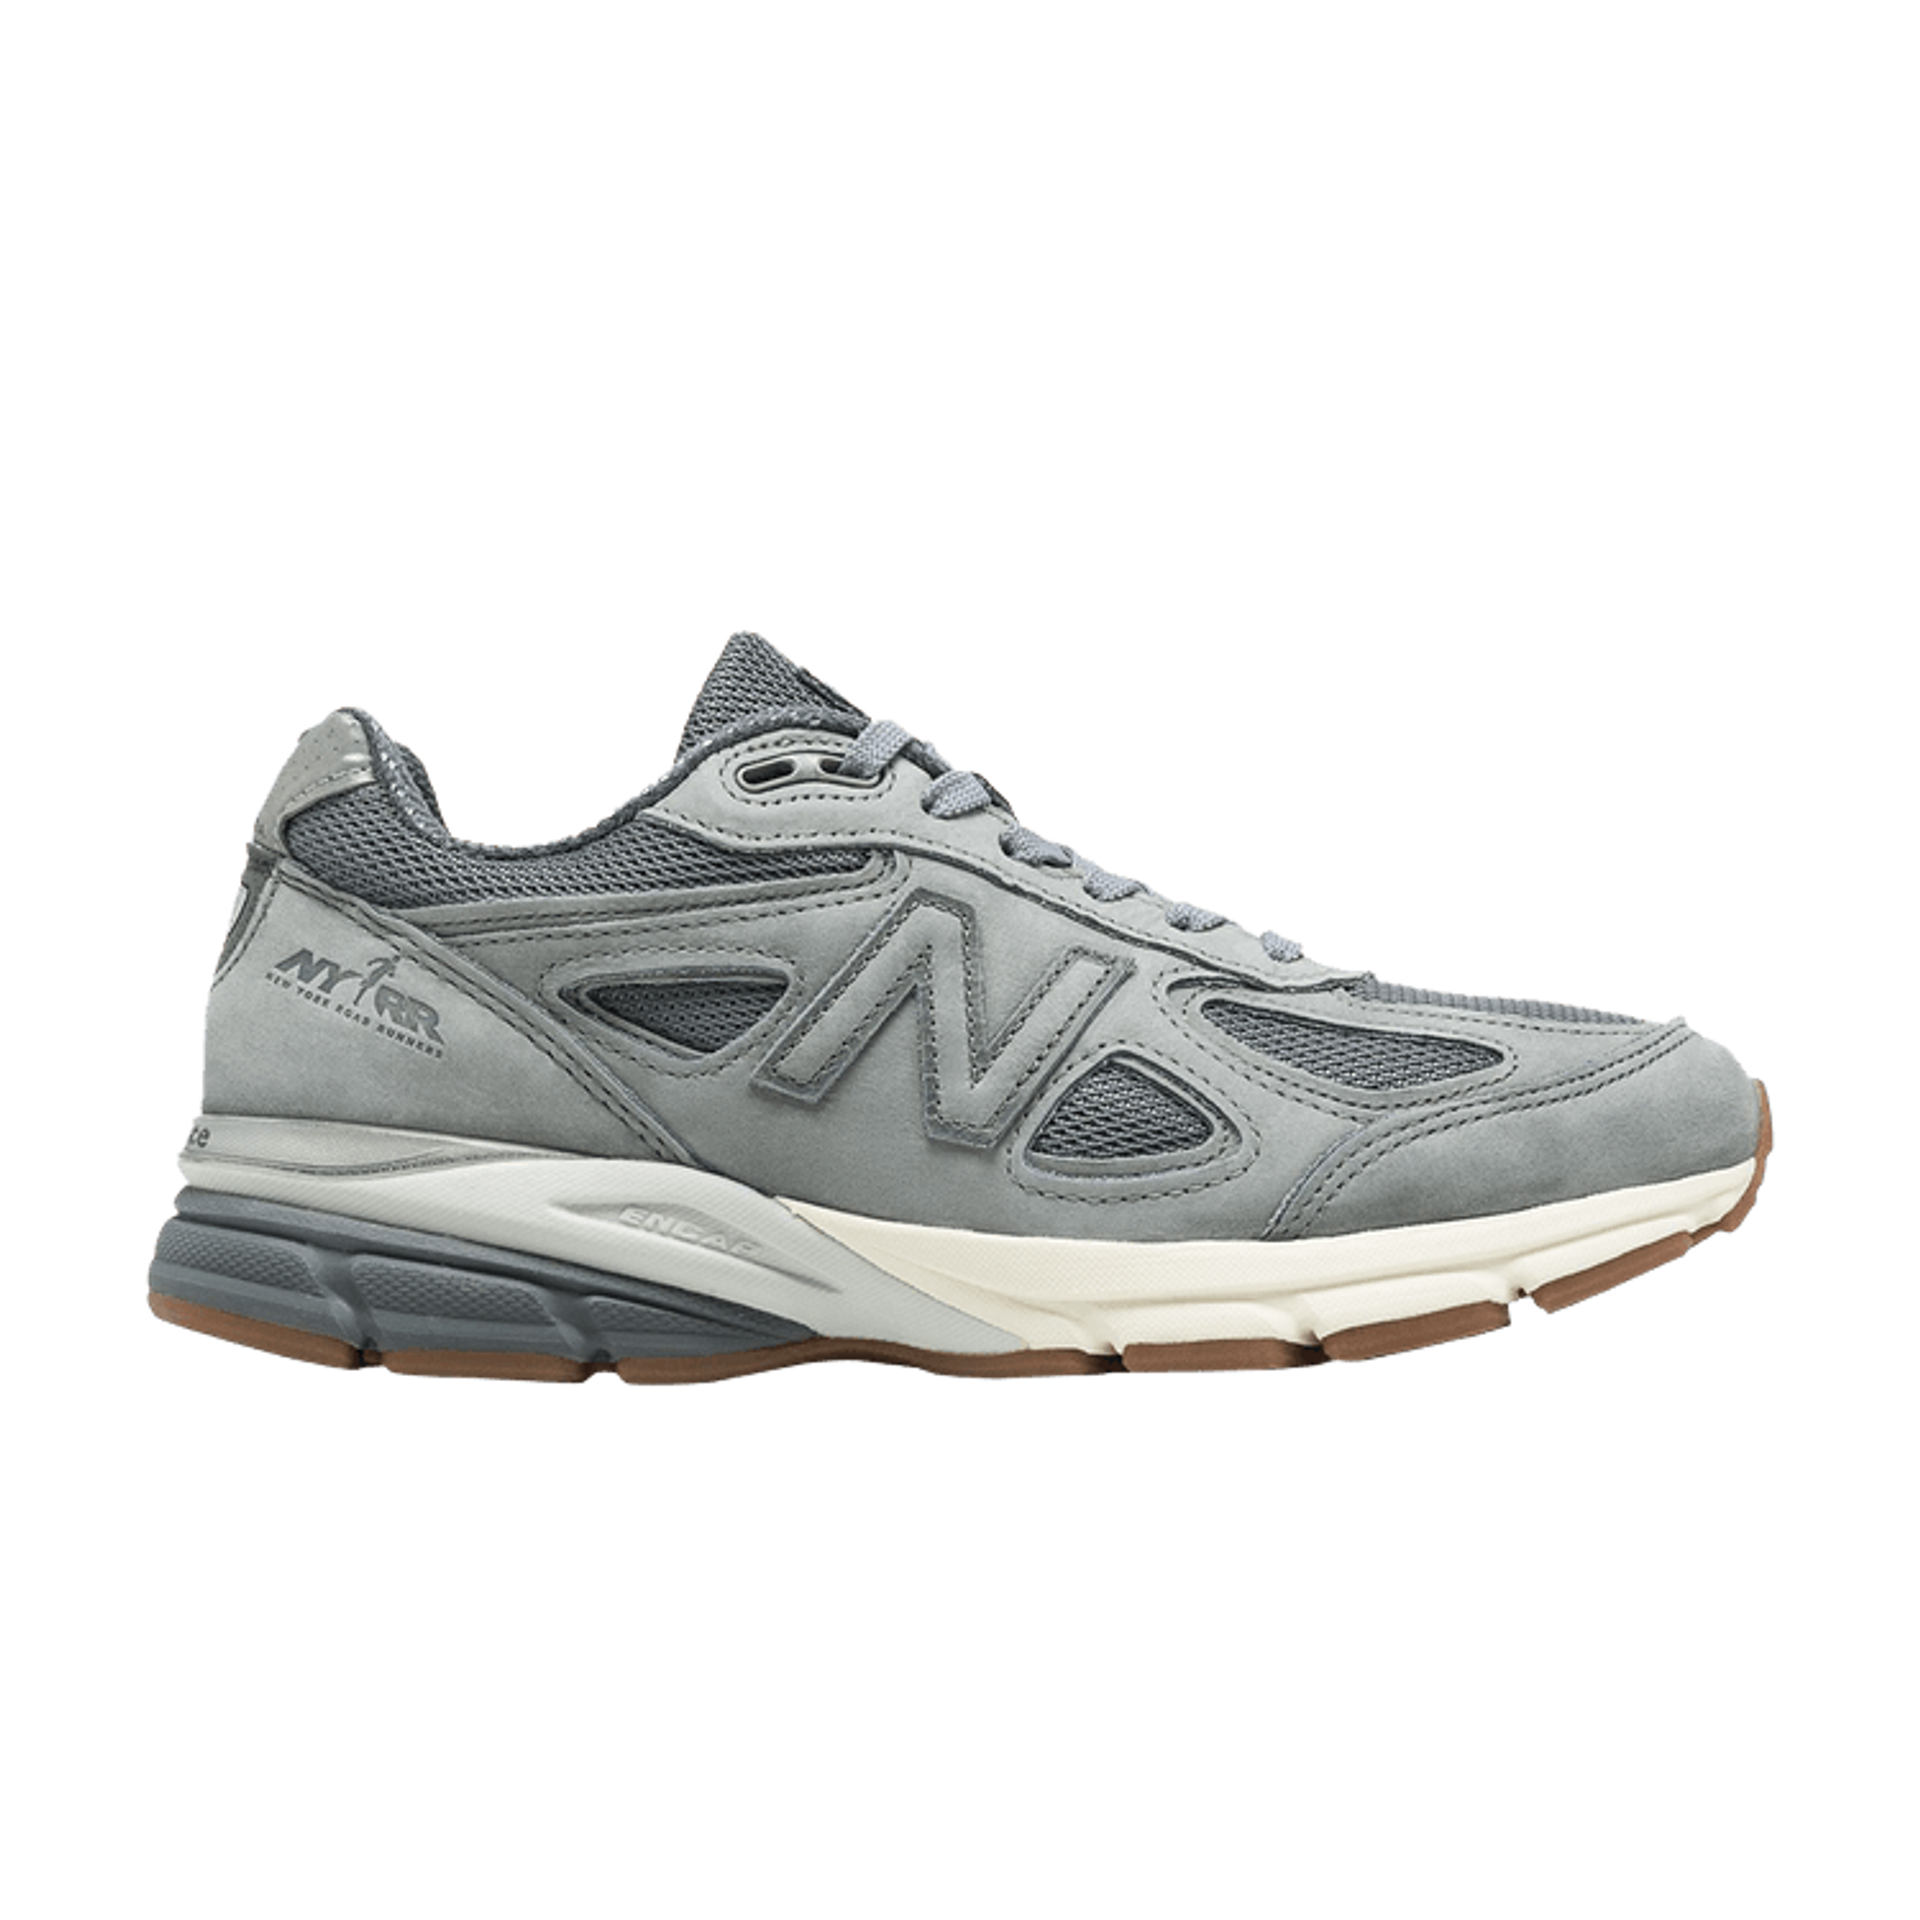 New York Road Runners x Wmns 990v4 Made In USA 'Club Pack - Gunmetal'